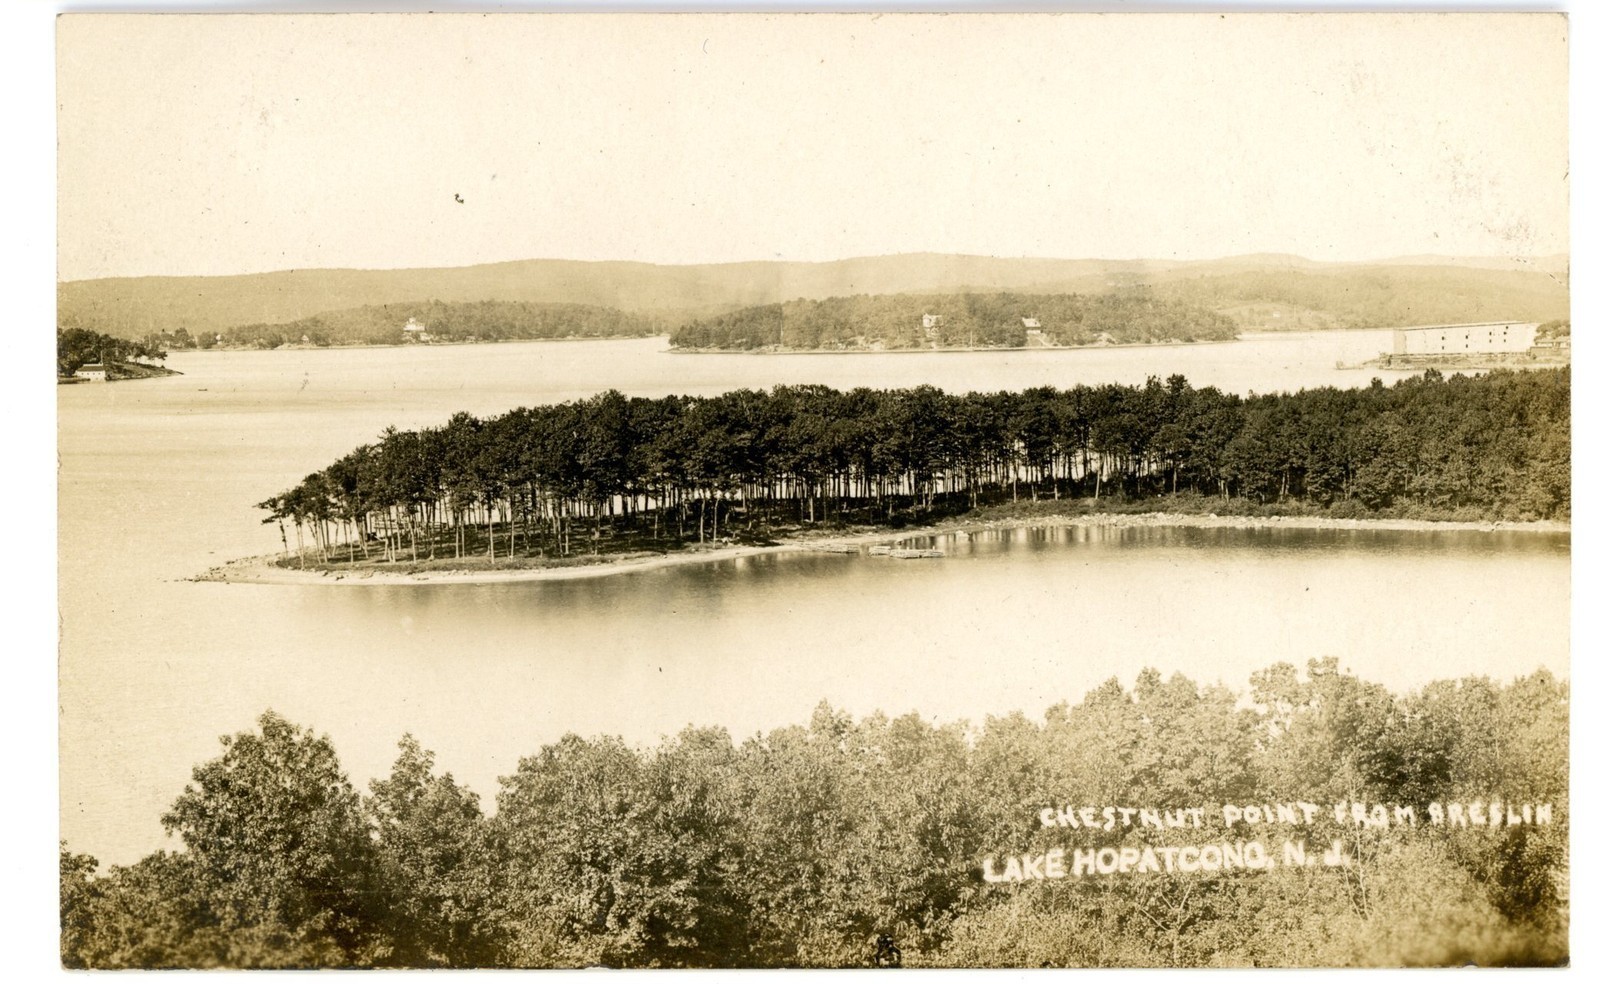 Lake Hopatcong - Chestnut Point from the Breslin Hotel - c 1910